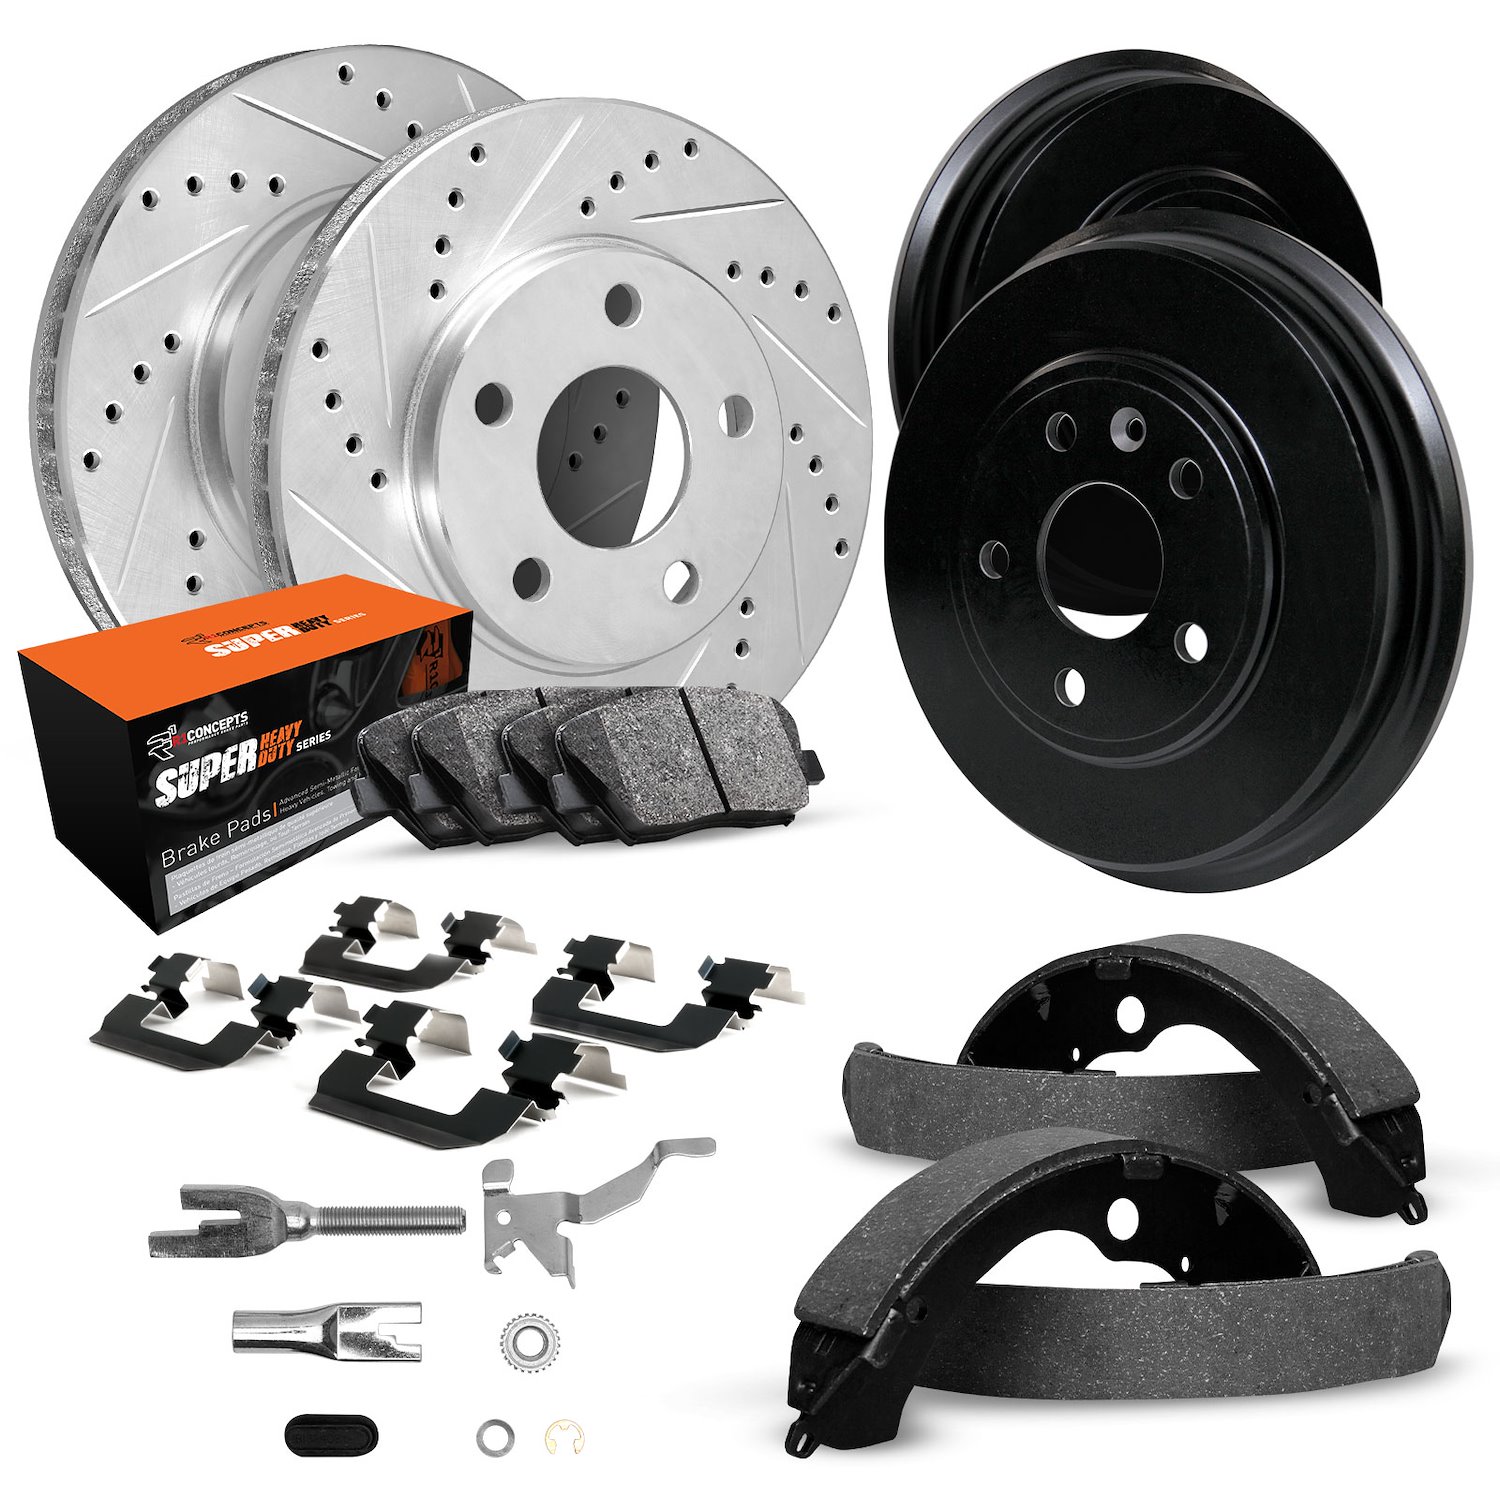 E-Line Drilled/Slotted Silver Rotor & Drum Set w/Super-Duty Pads, Shoes/Hardware/Adjusters, 1984-1985 Mopar